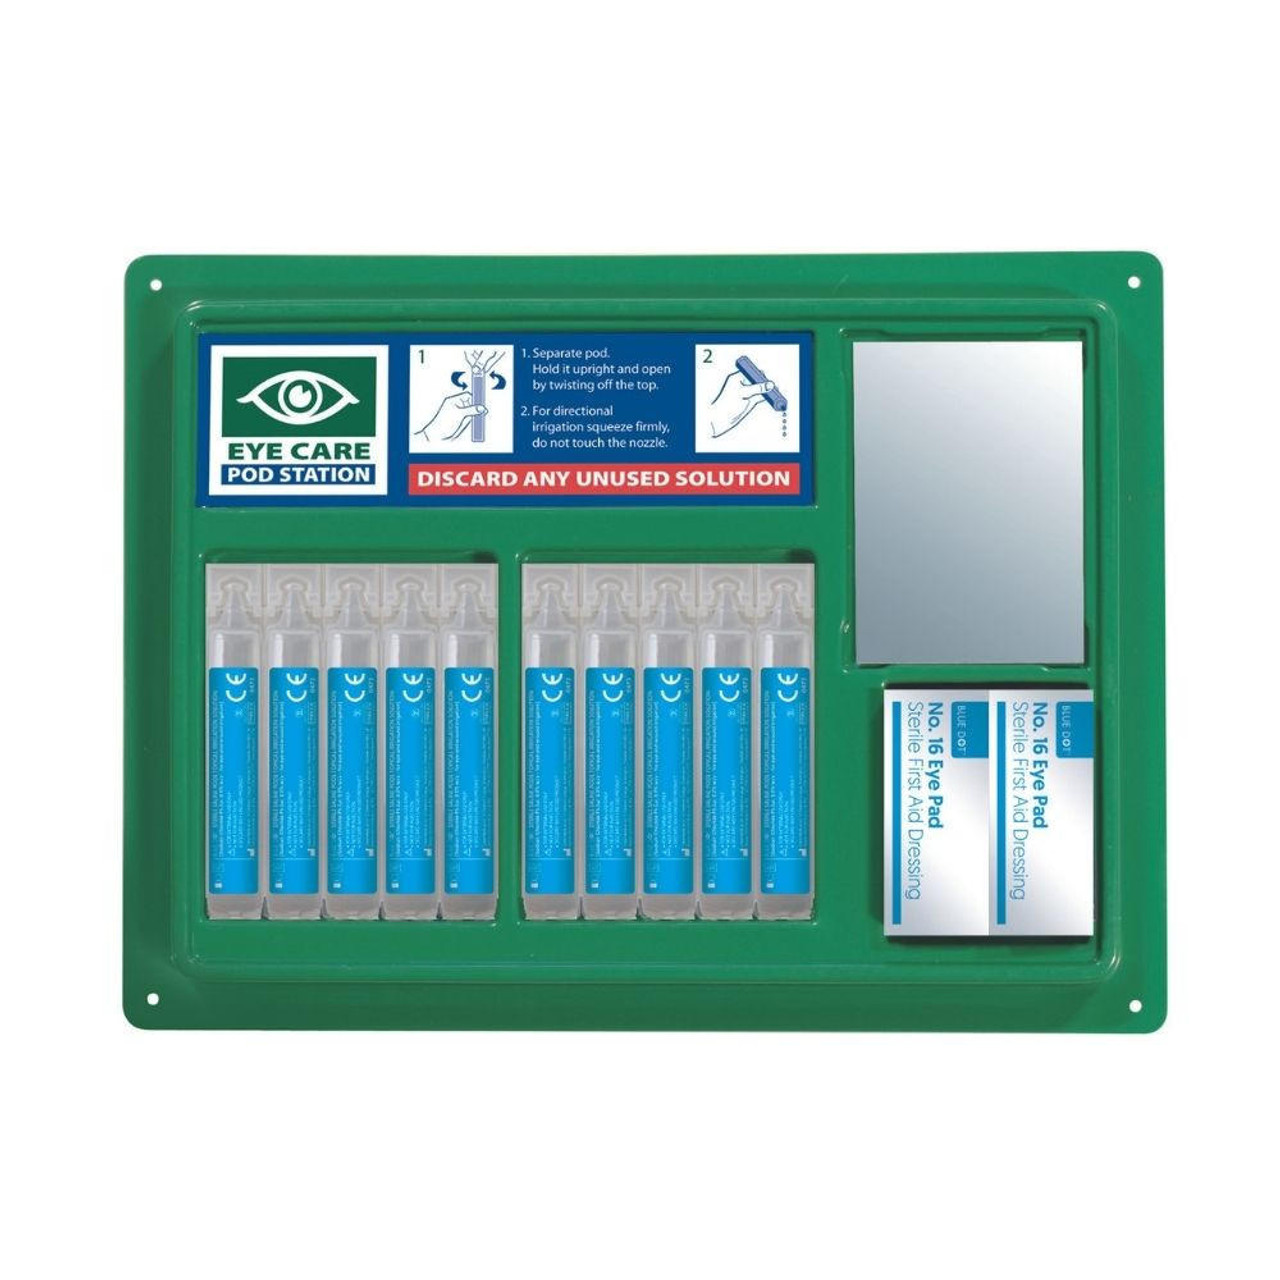 Eyewash Pod Station or Complete with 10x 20ml pods and 2 eye pads